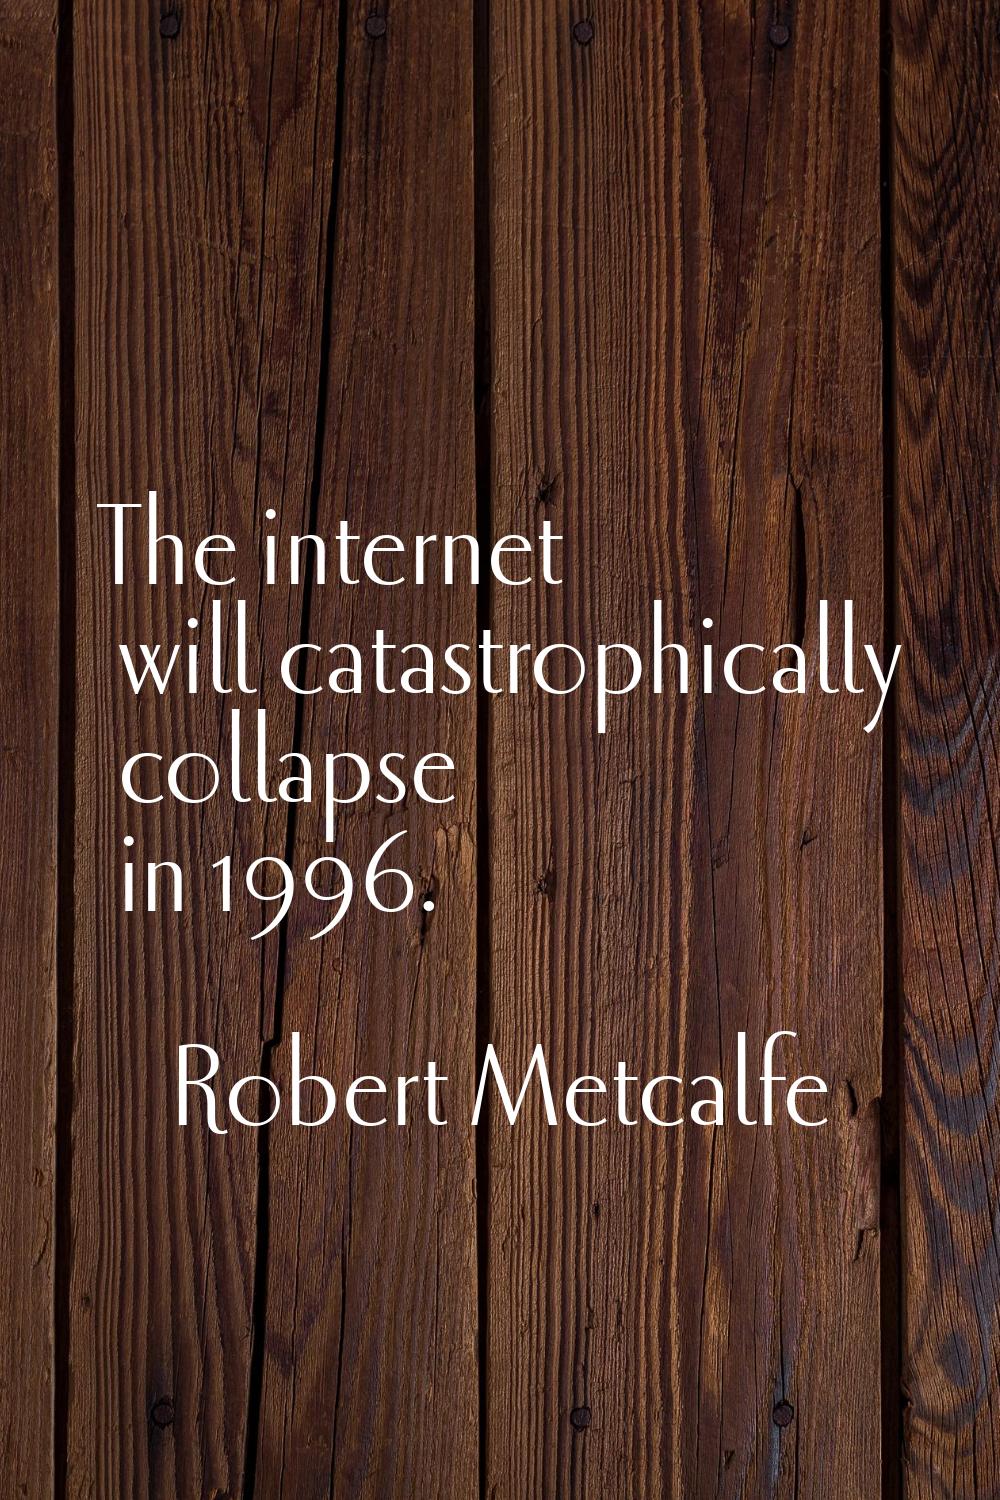 The internet will catastrophically collapse in 1996.